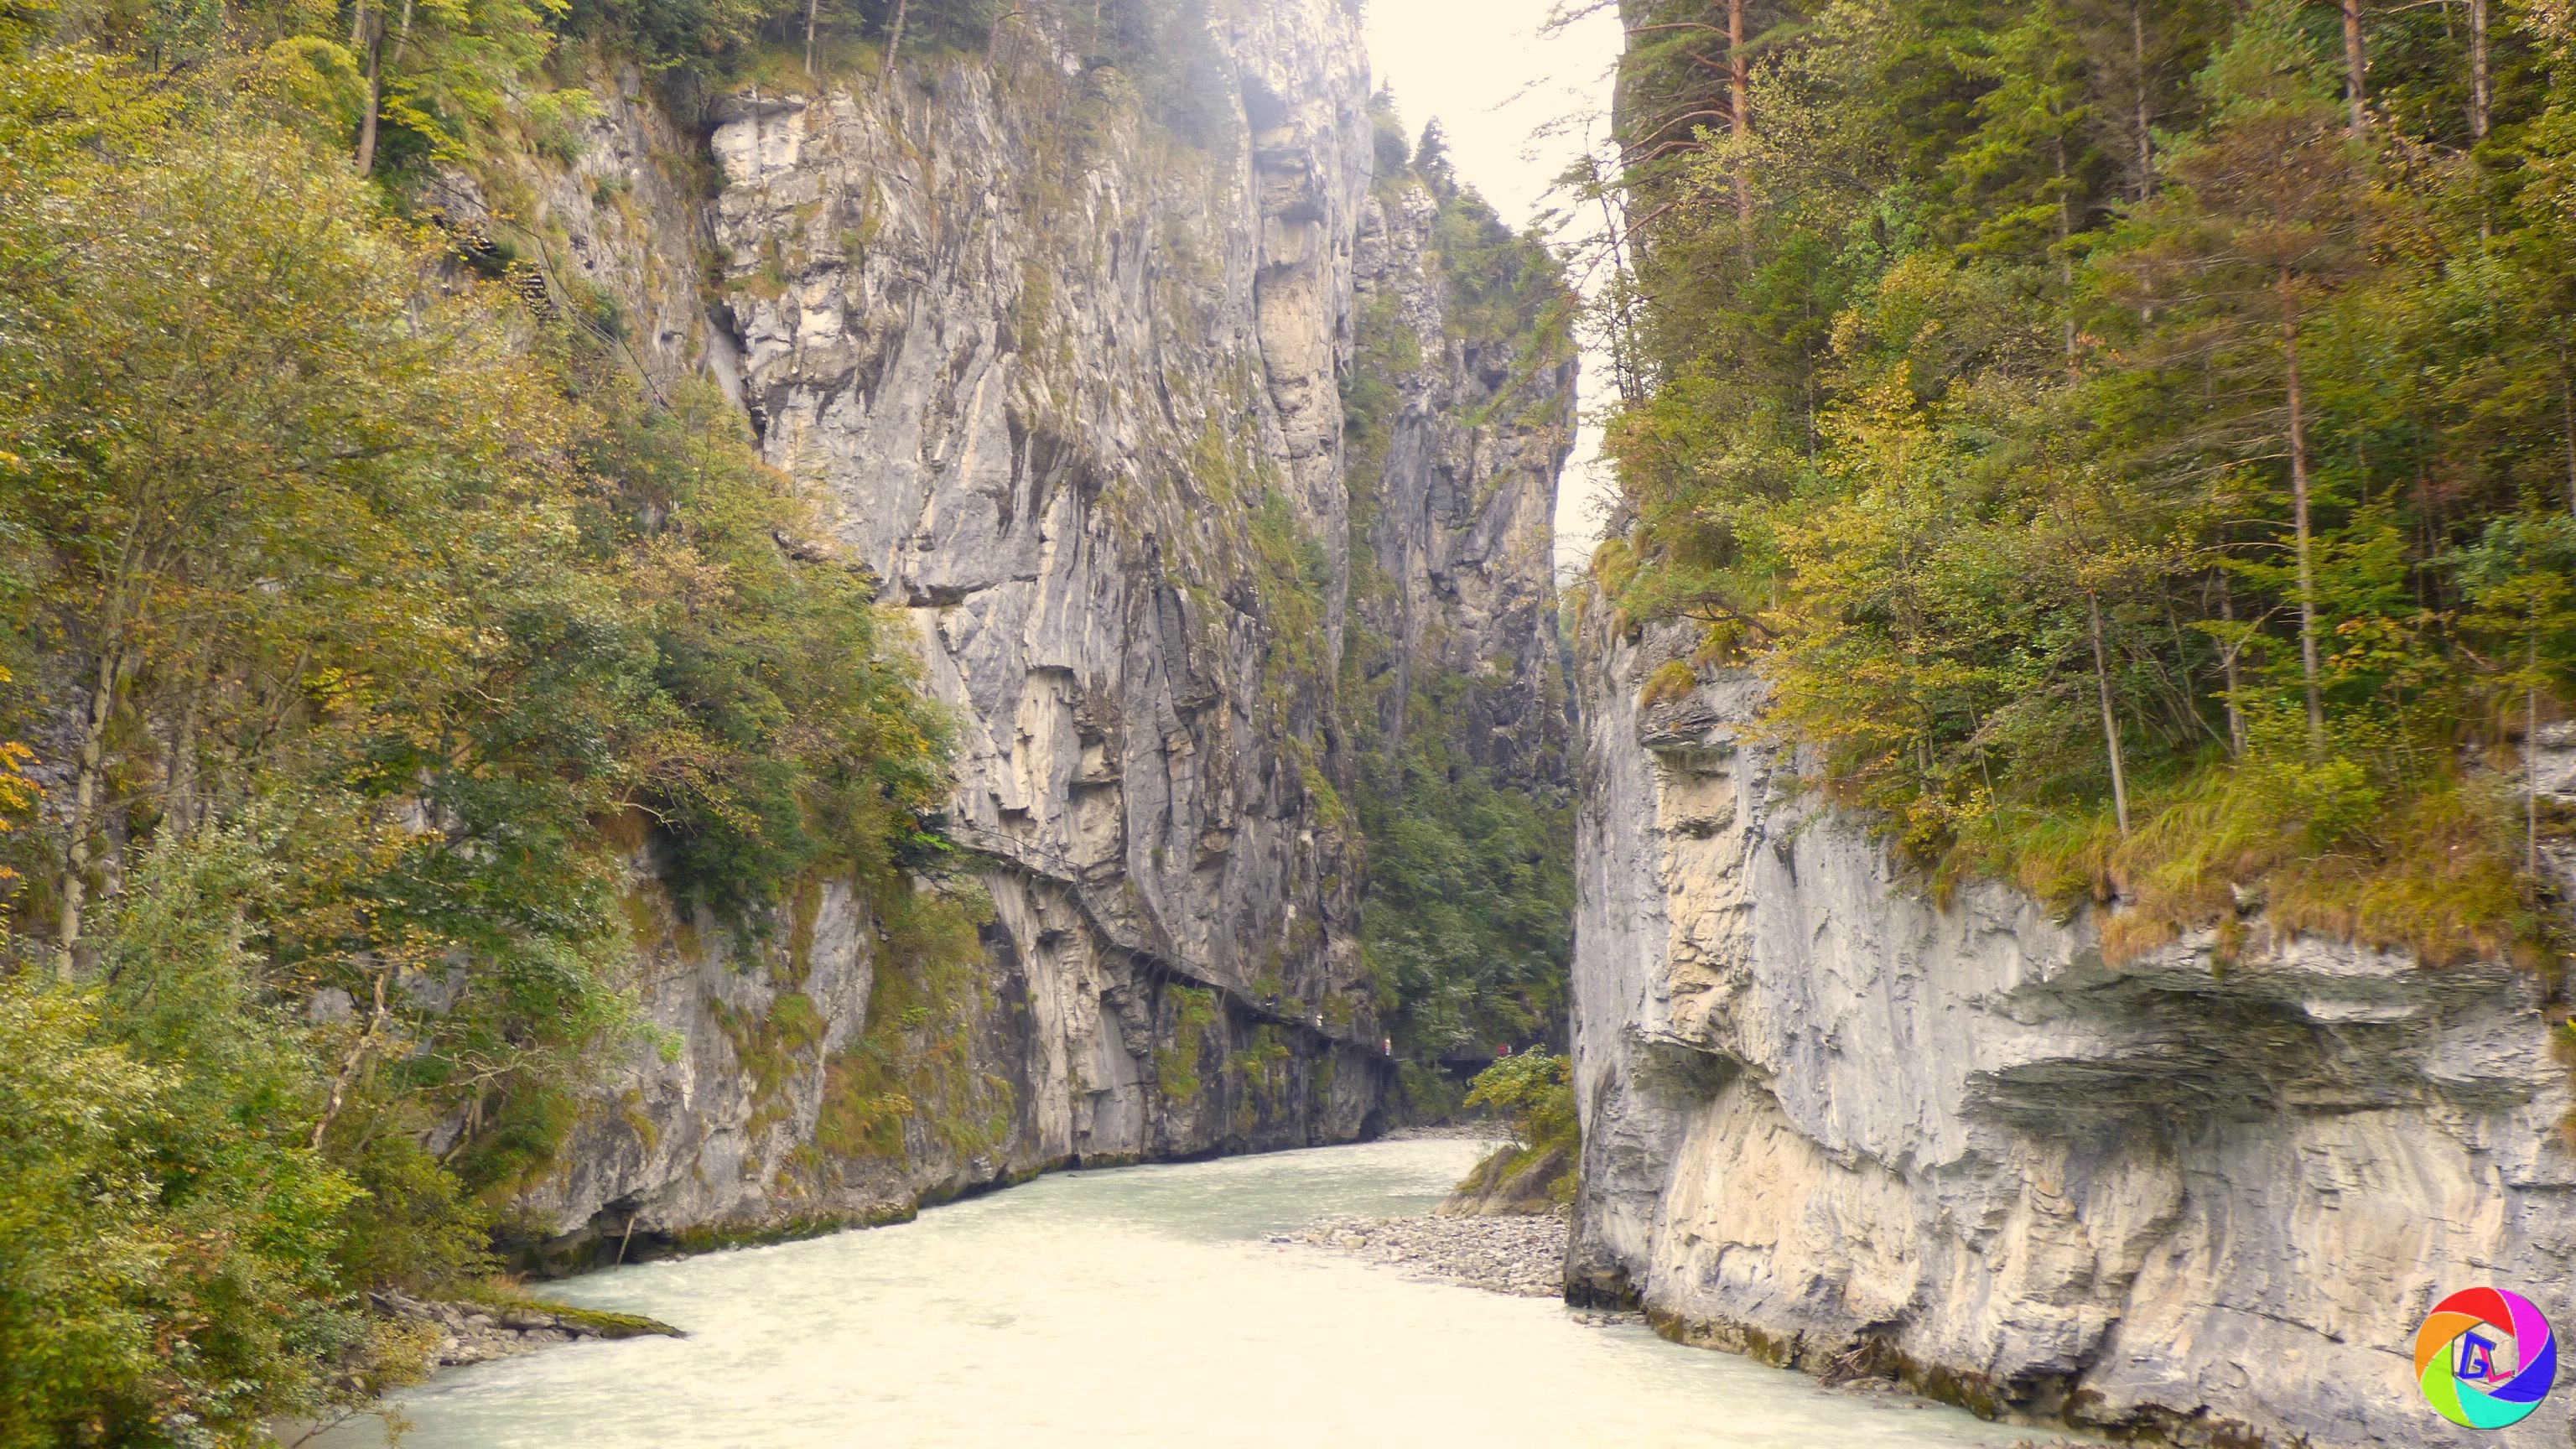 "The gorge of the river Aare"